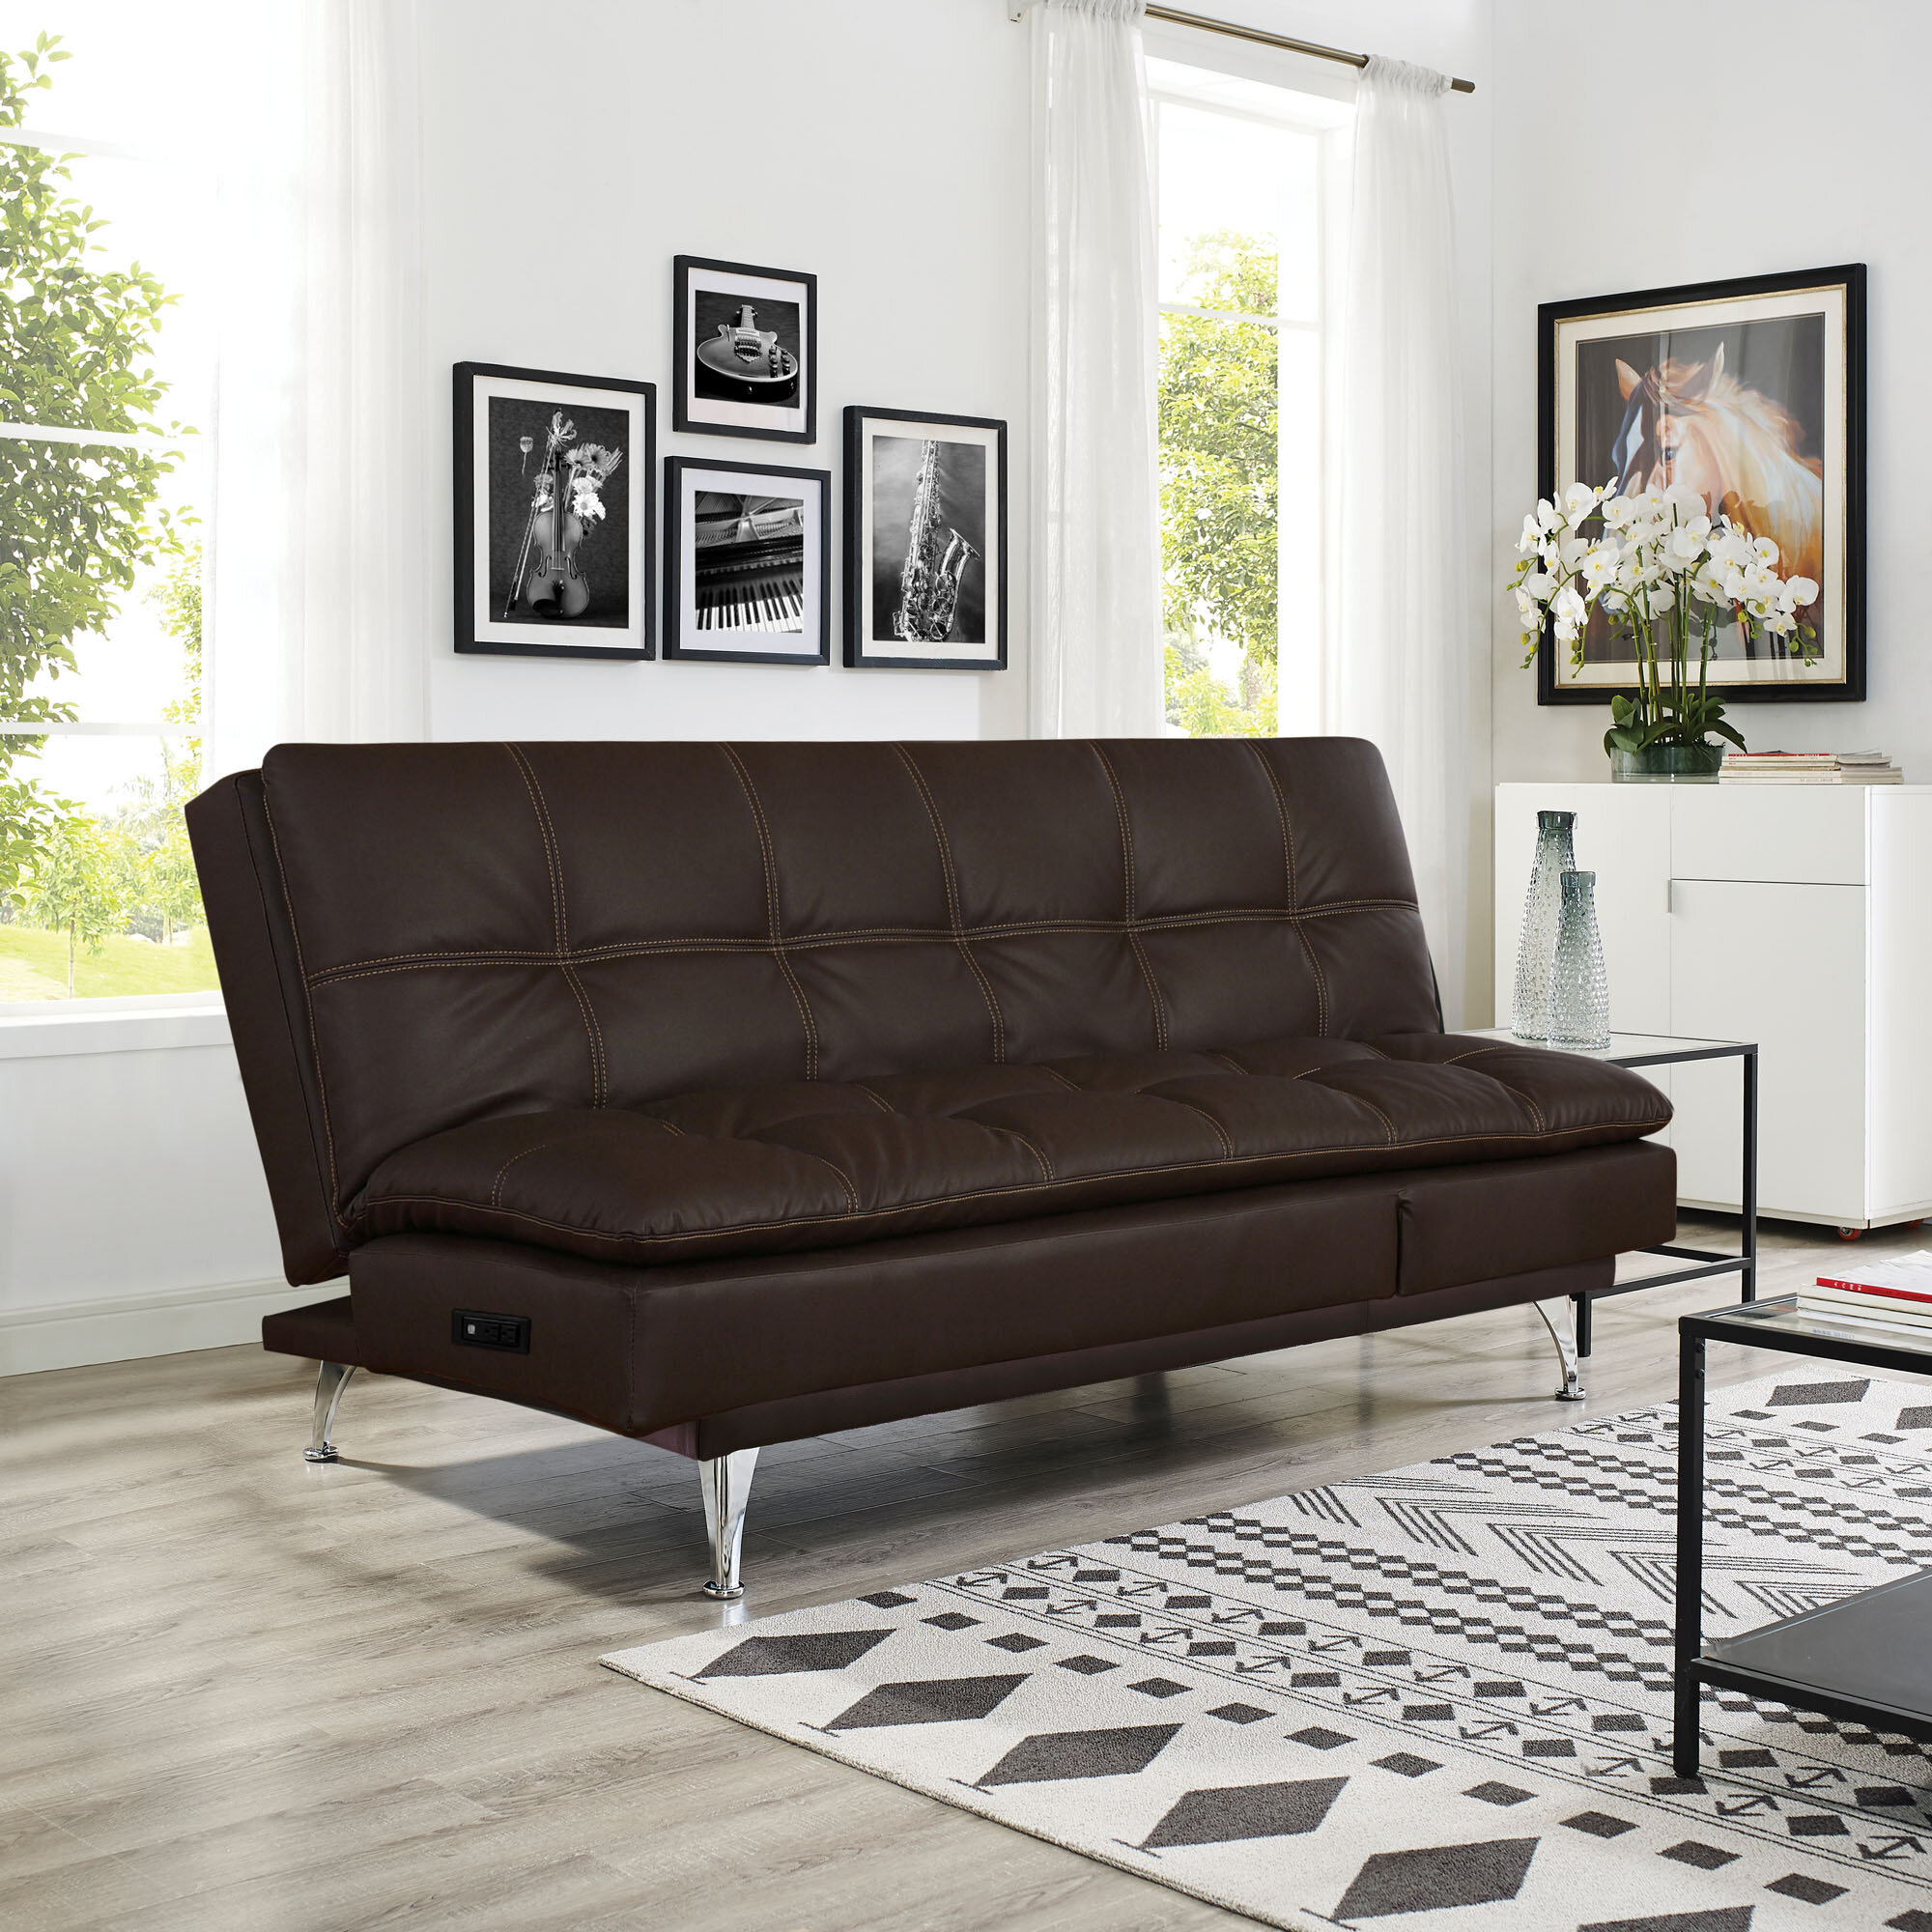 Serta Marie 78.9'' Faux Leather Tufted Convertible Sleeper Sofa & Reviews